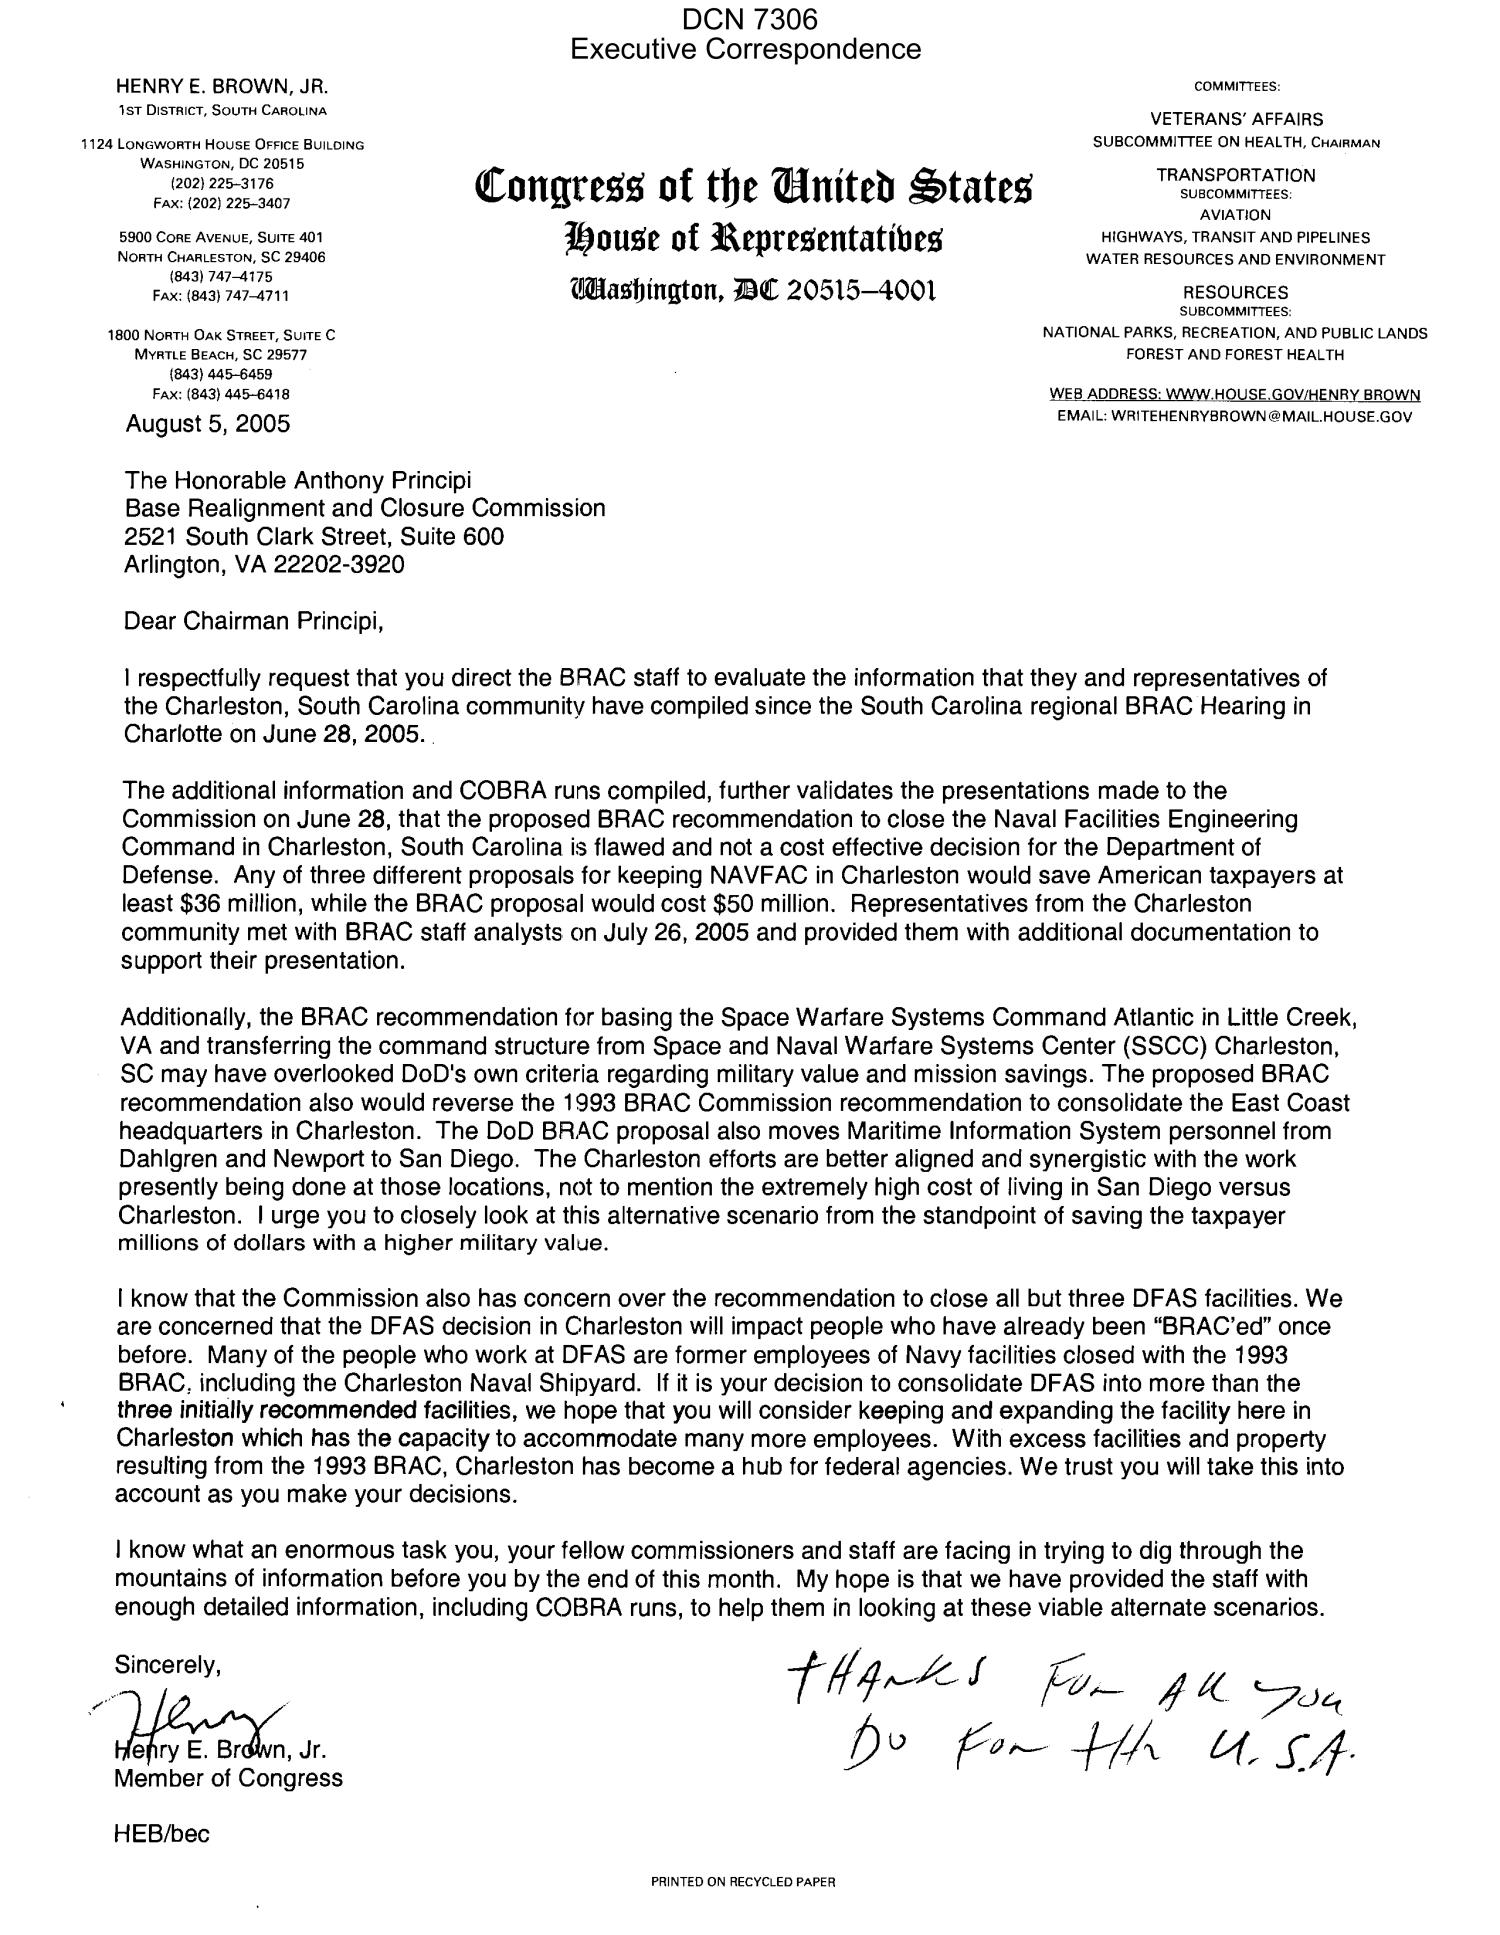 Letter dtd 08/05/05 to Chairman Principi from Representative Henry Brown (1st, SC)
                                                
                                                    [Sequence #]: 1 of 1
                                                